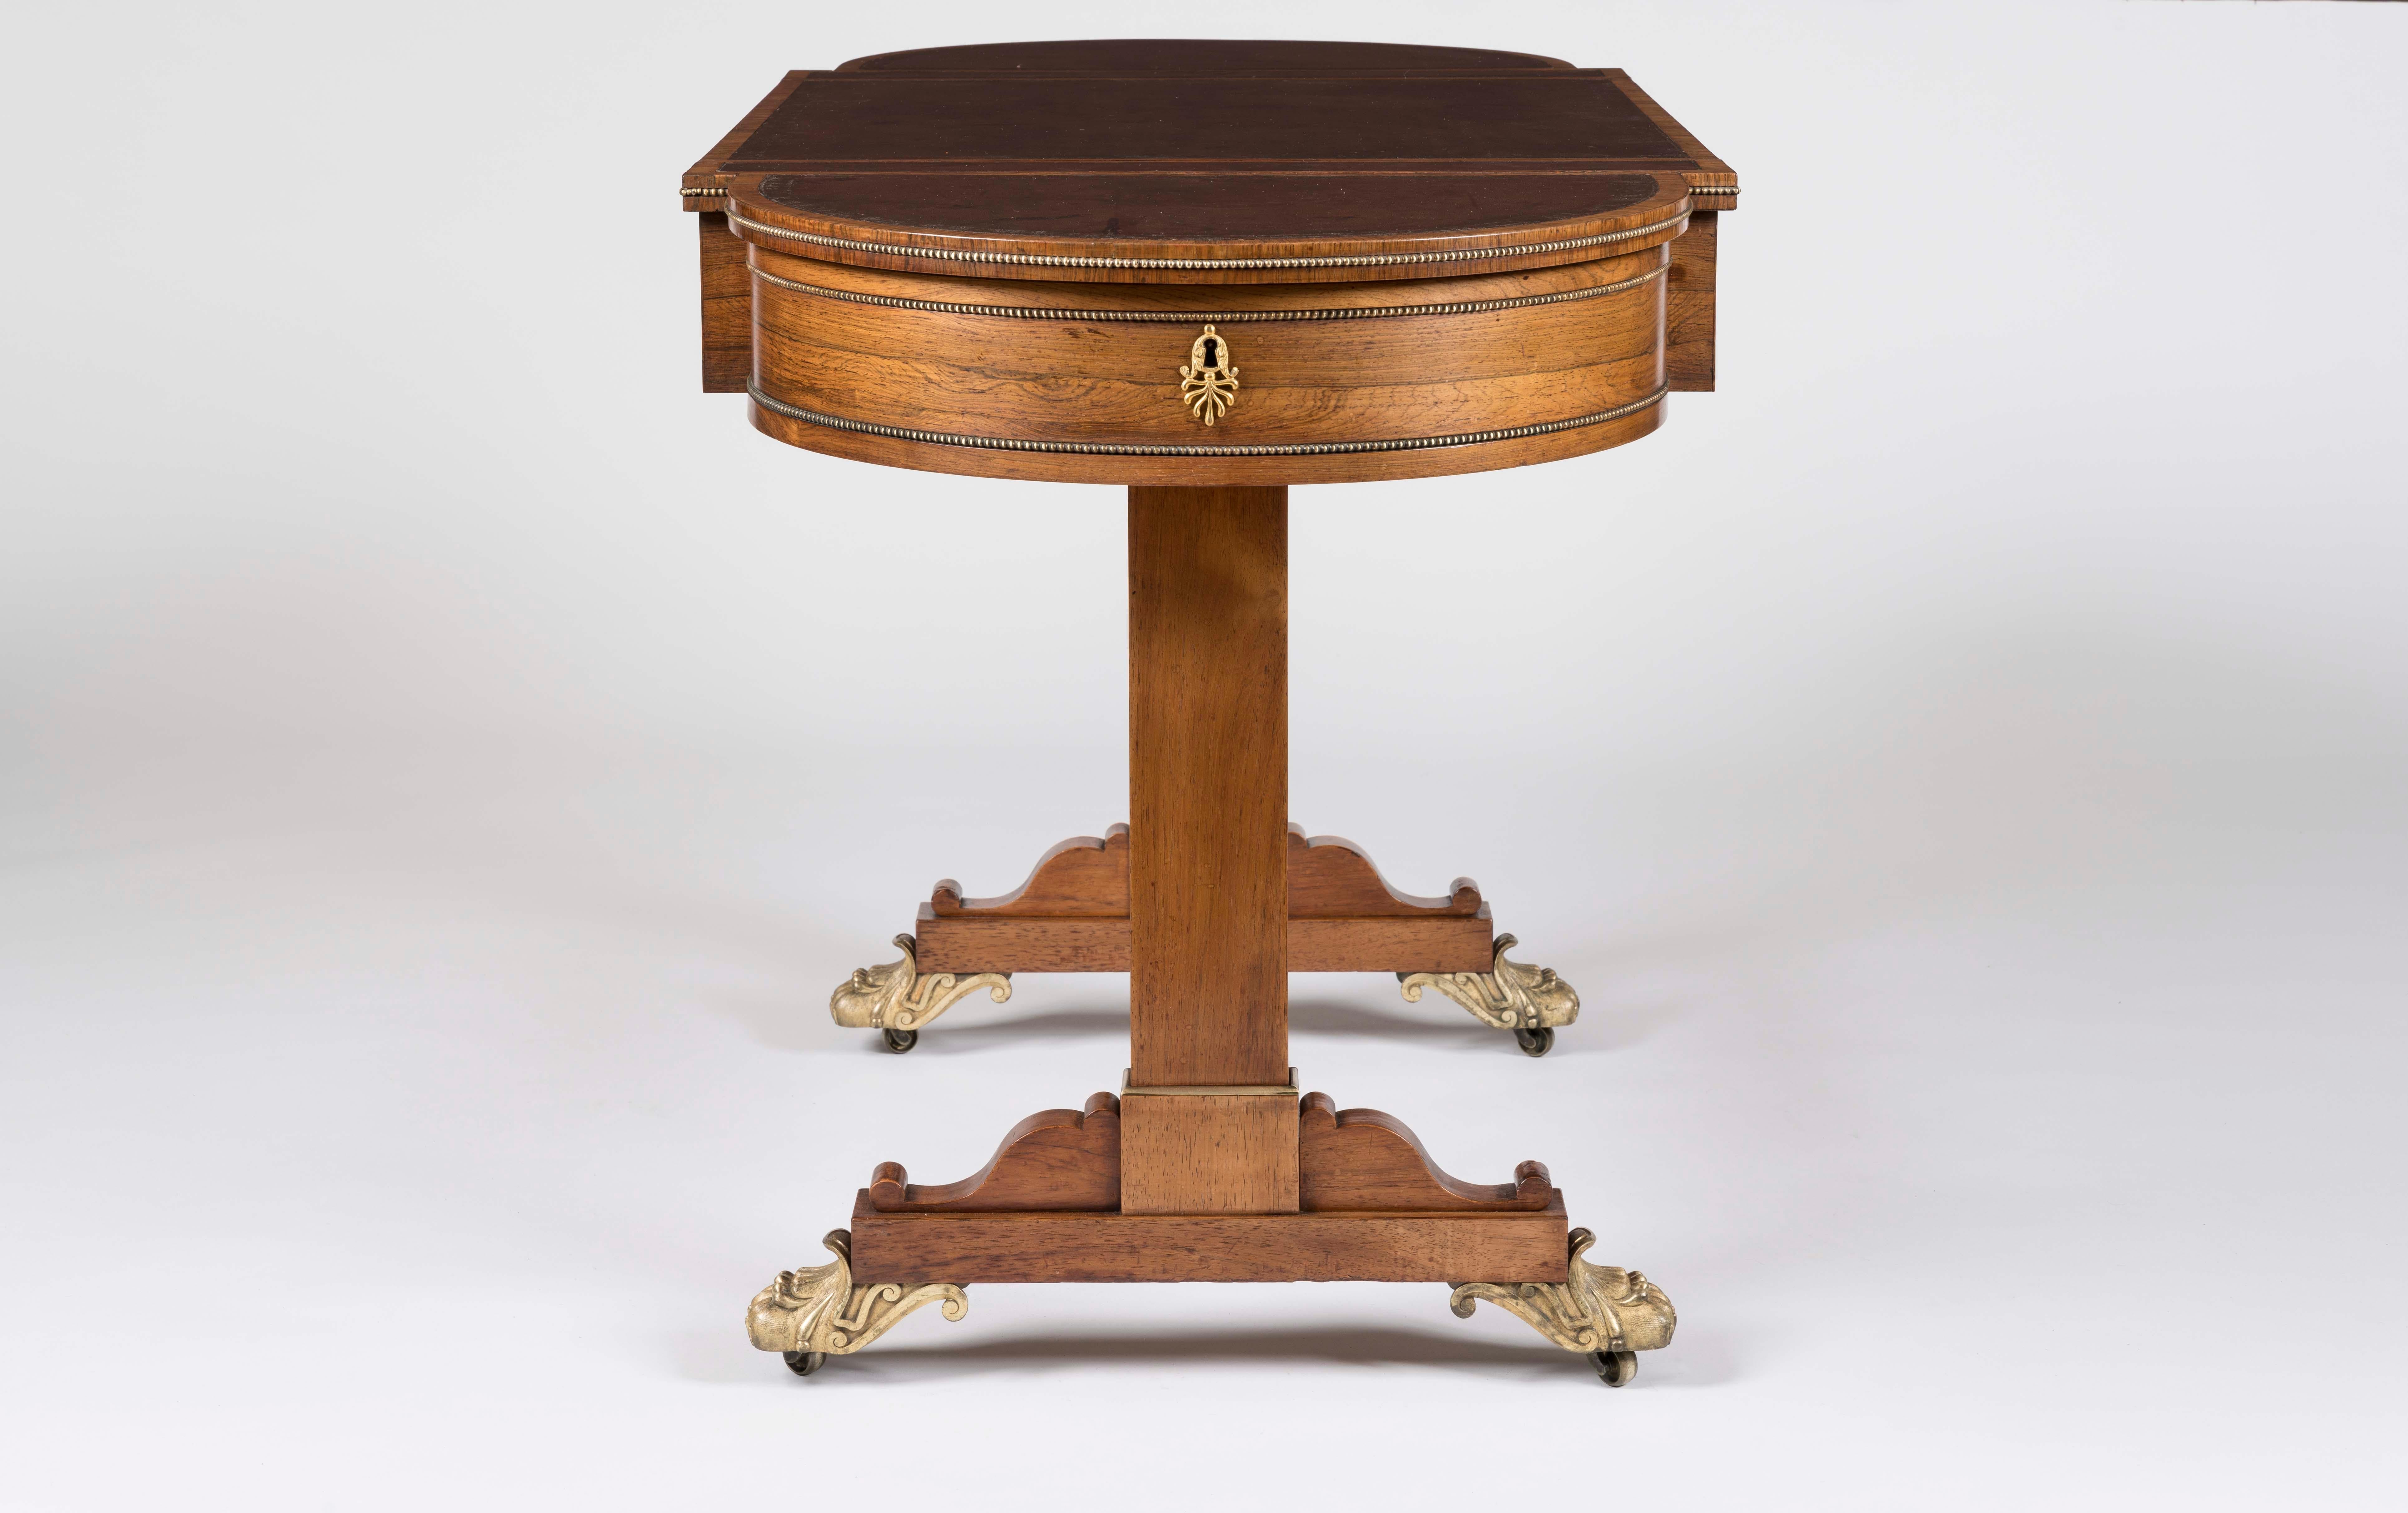 English Regency Period Rosewood Games Table Attributed to Gillows of Lancaster